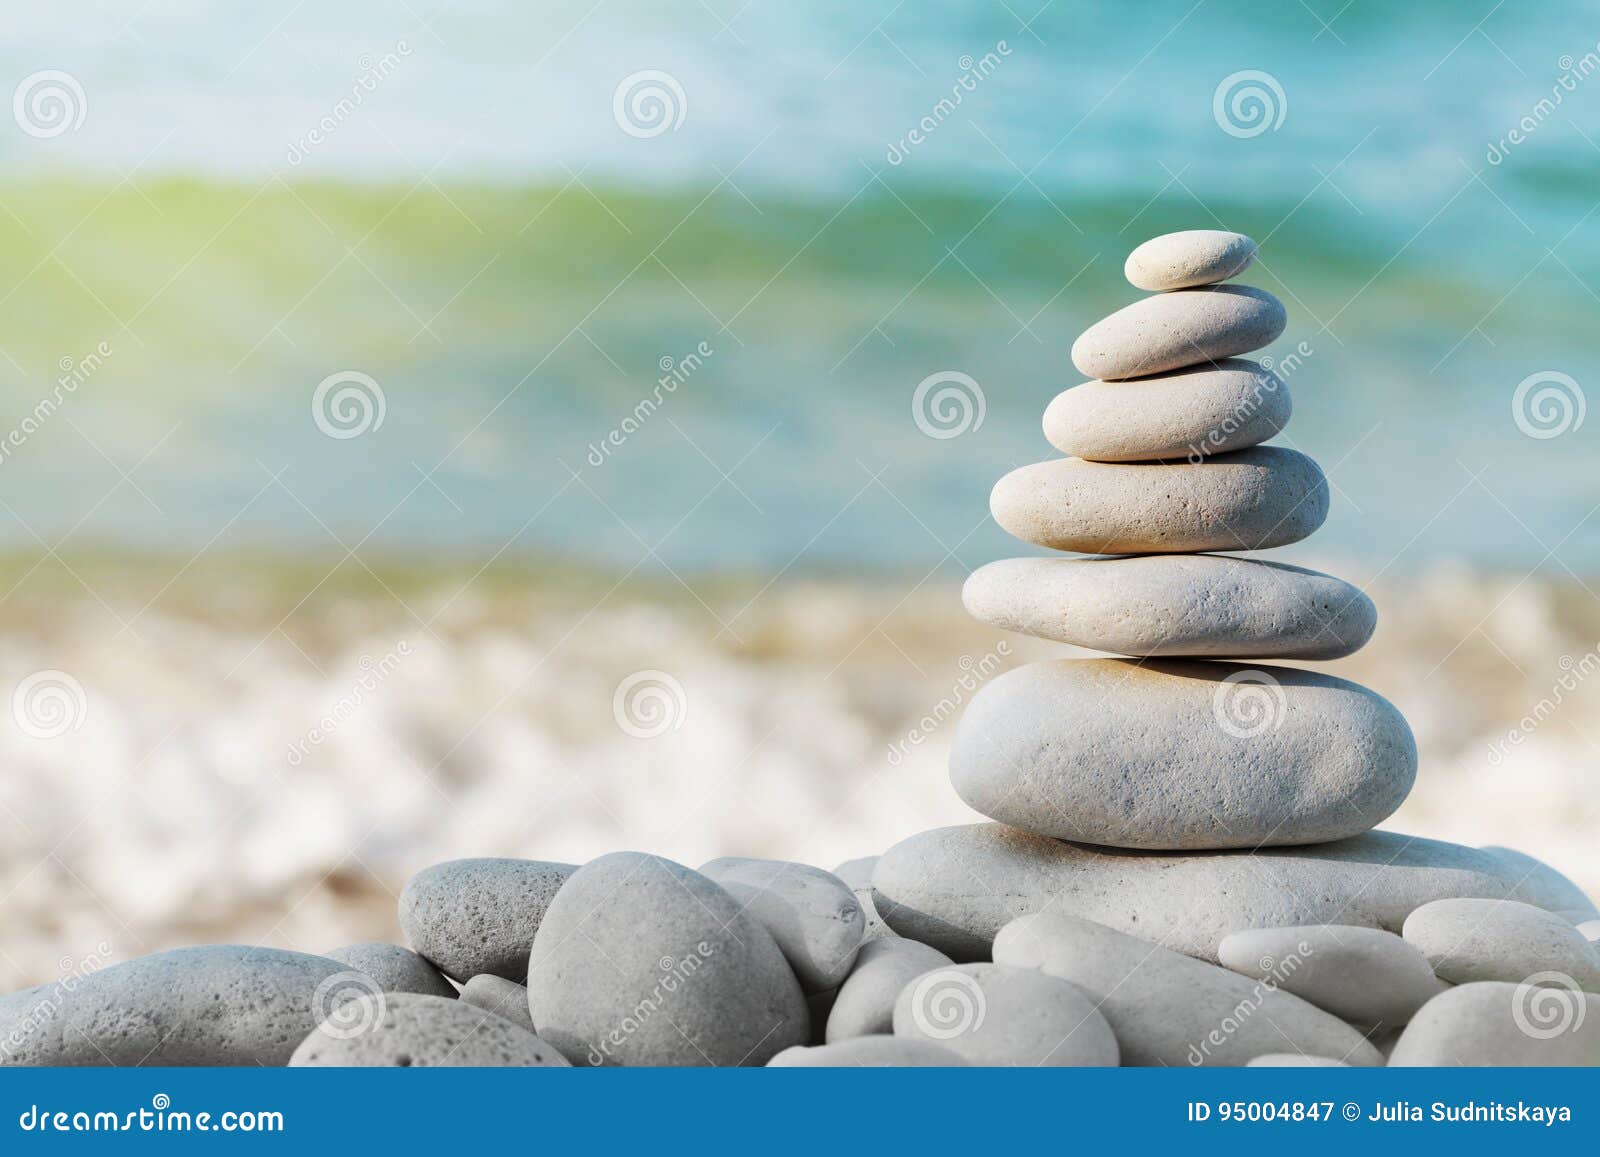 stack of white pebbles stone against blue sea background for spa, balance, meditation and zen theme.